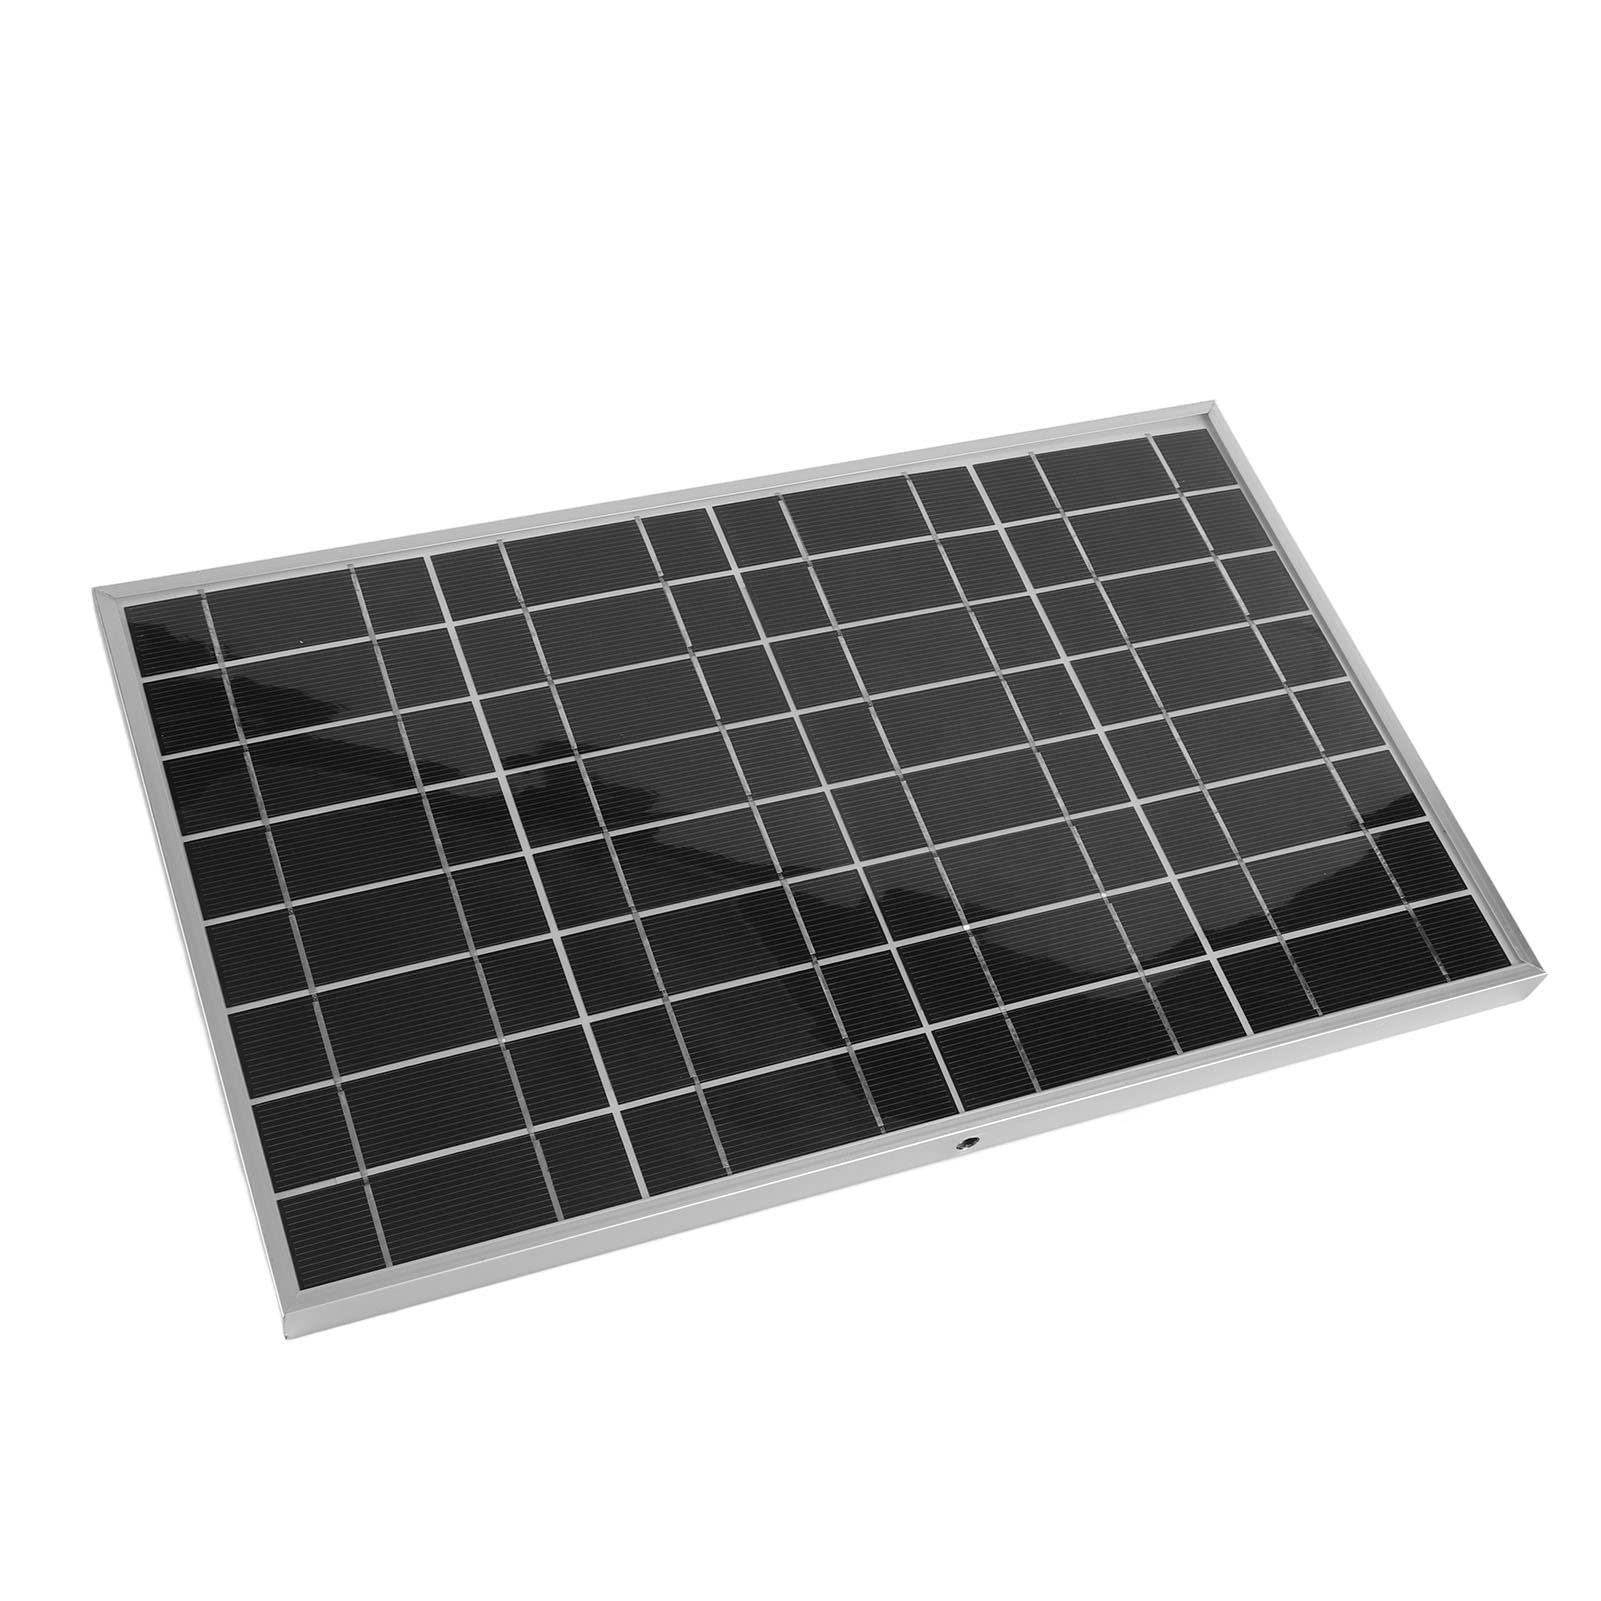 KENANLAN 30W Solar Panel Kit, Polycrystalline Silicon Solar Charge Panel with 40A Controller for Car RV Marine Boat